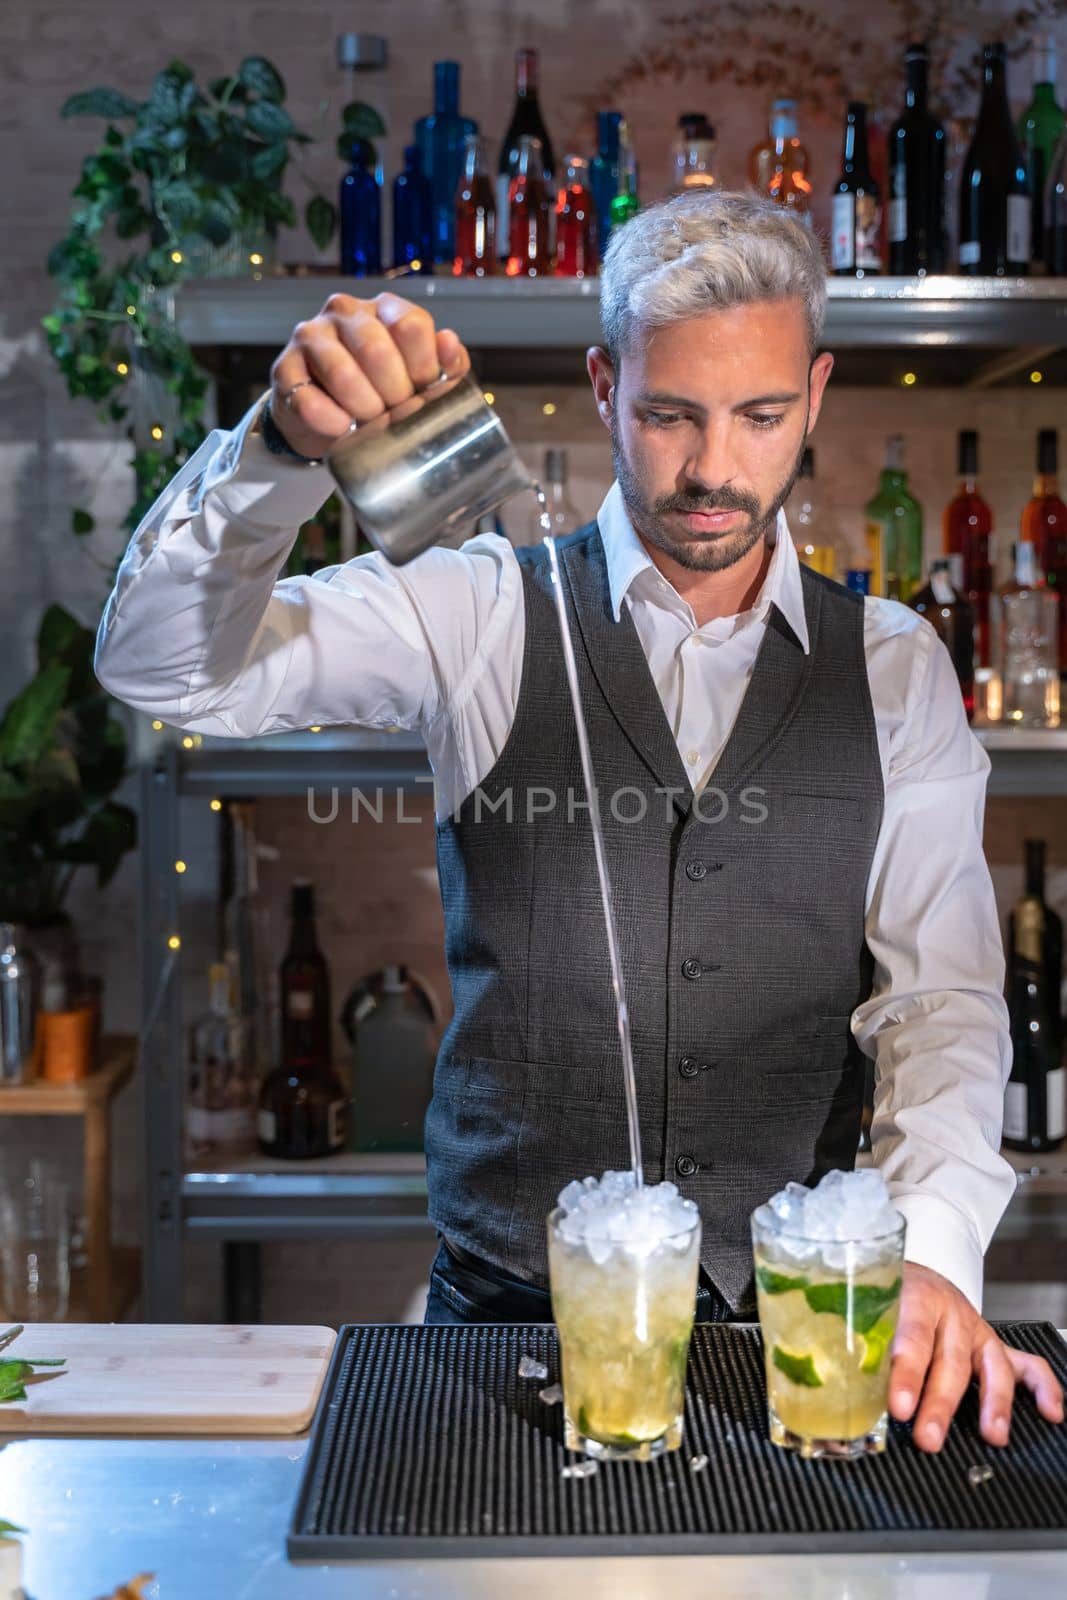 Barman making cocktail Mojito in night club adding ingredients and creating expert drinks on bar counter. High quality photo